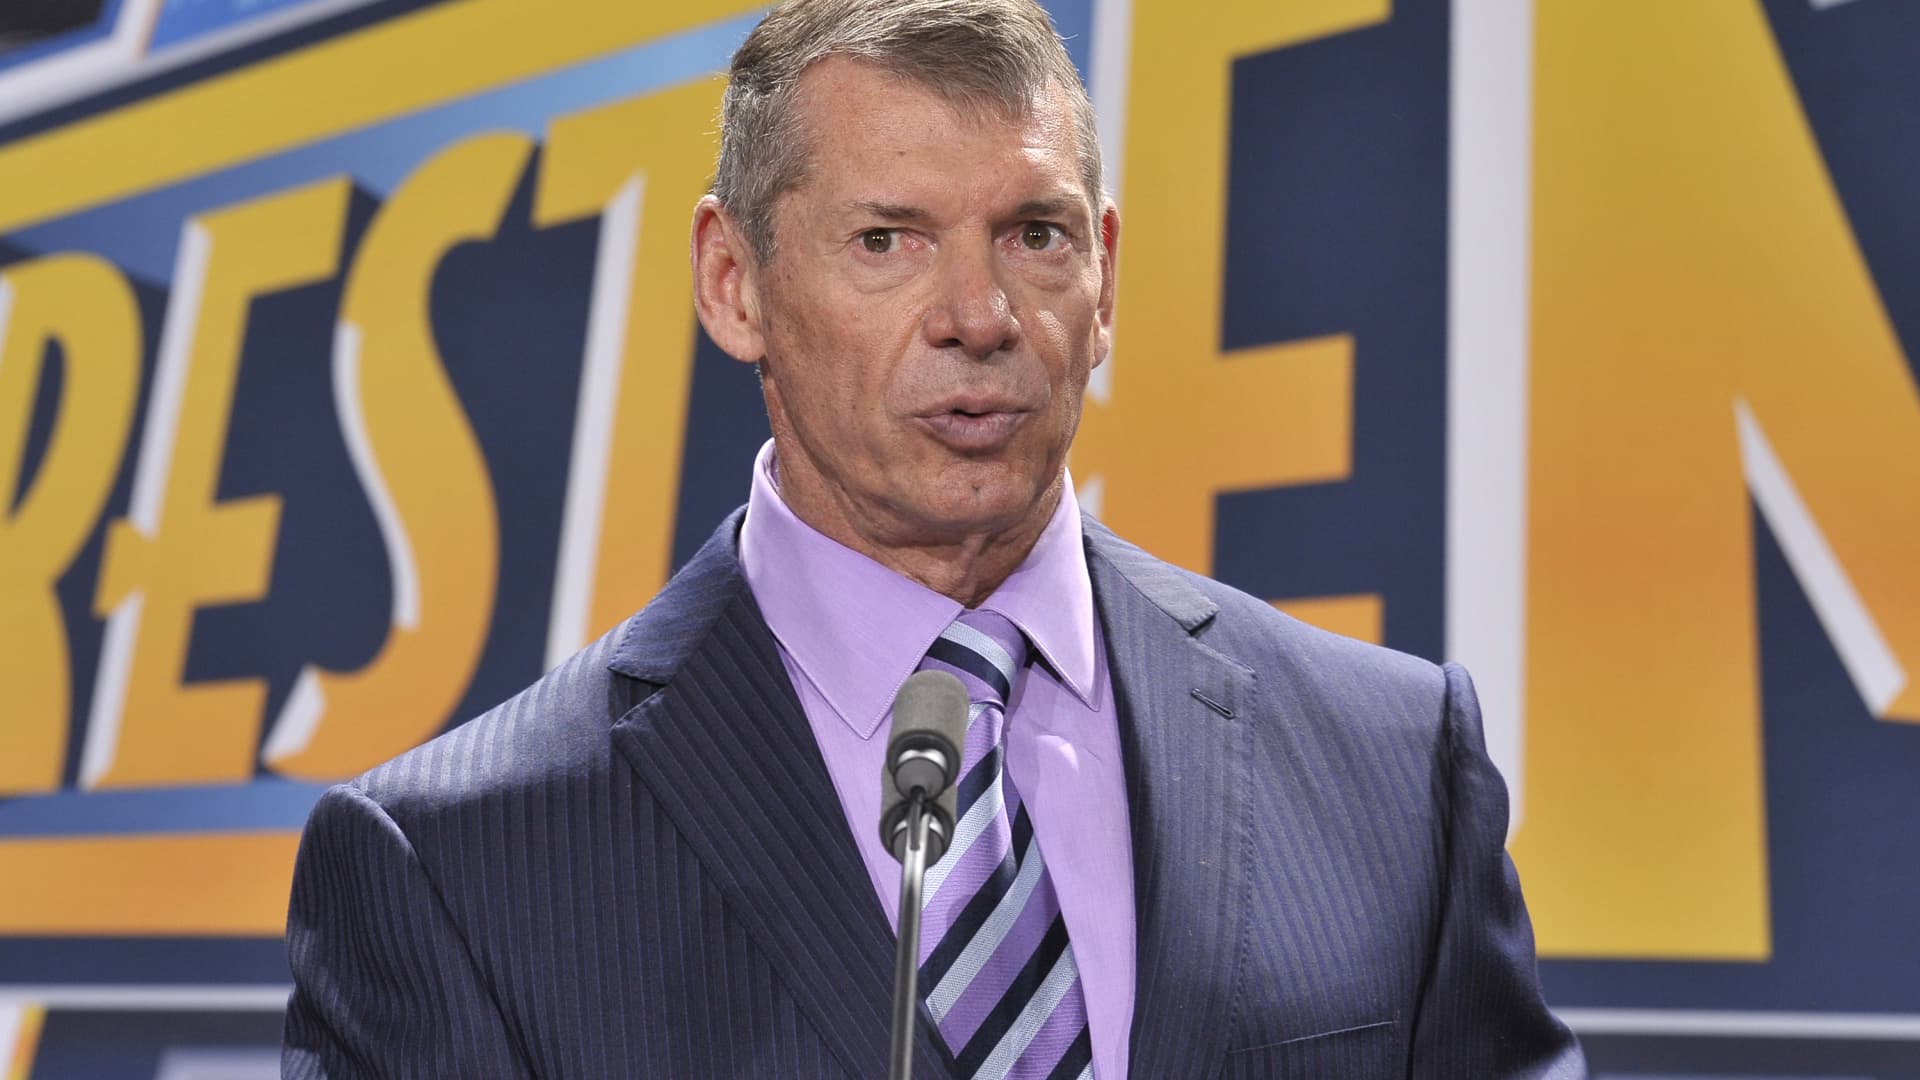 WWE boss Vince McMahon sued over sexual assault, trafficking